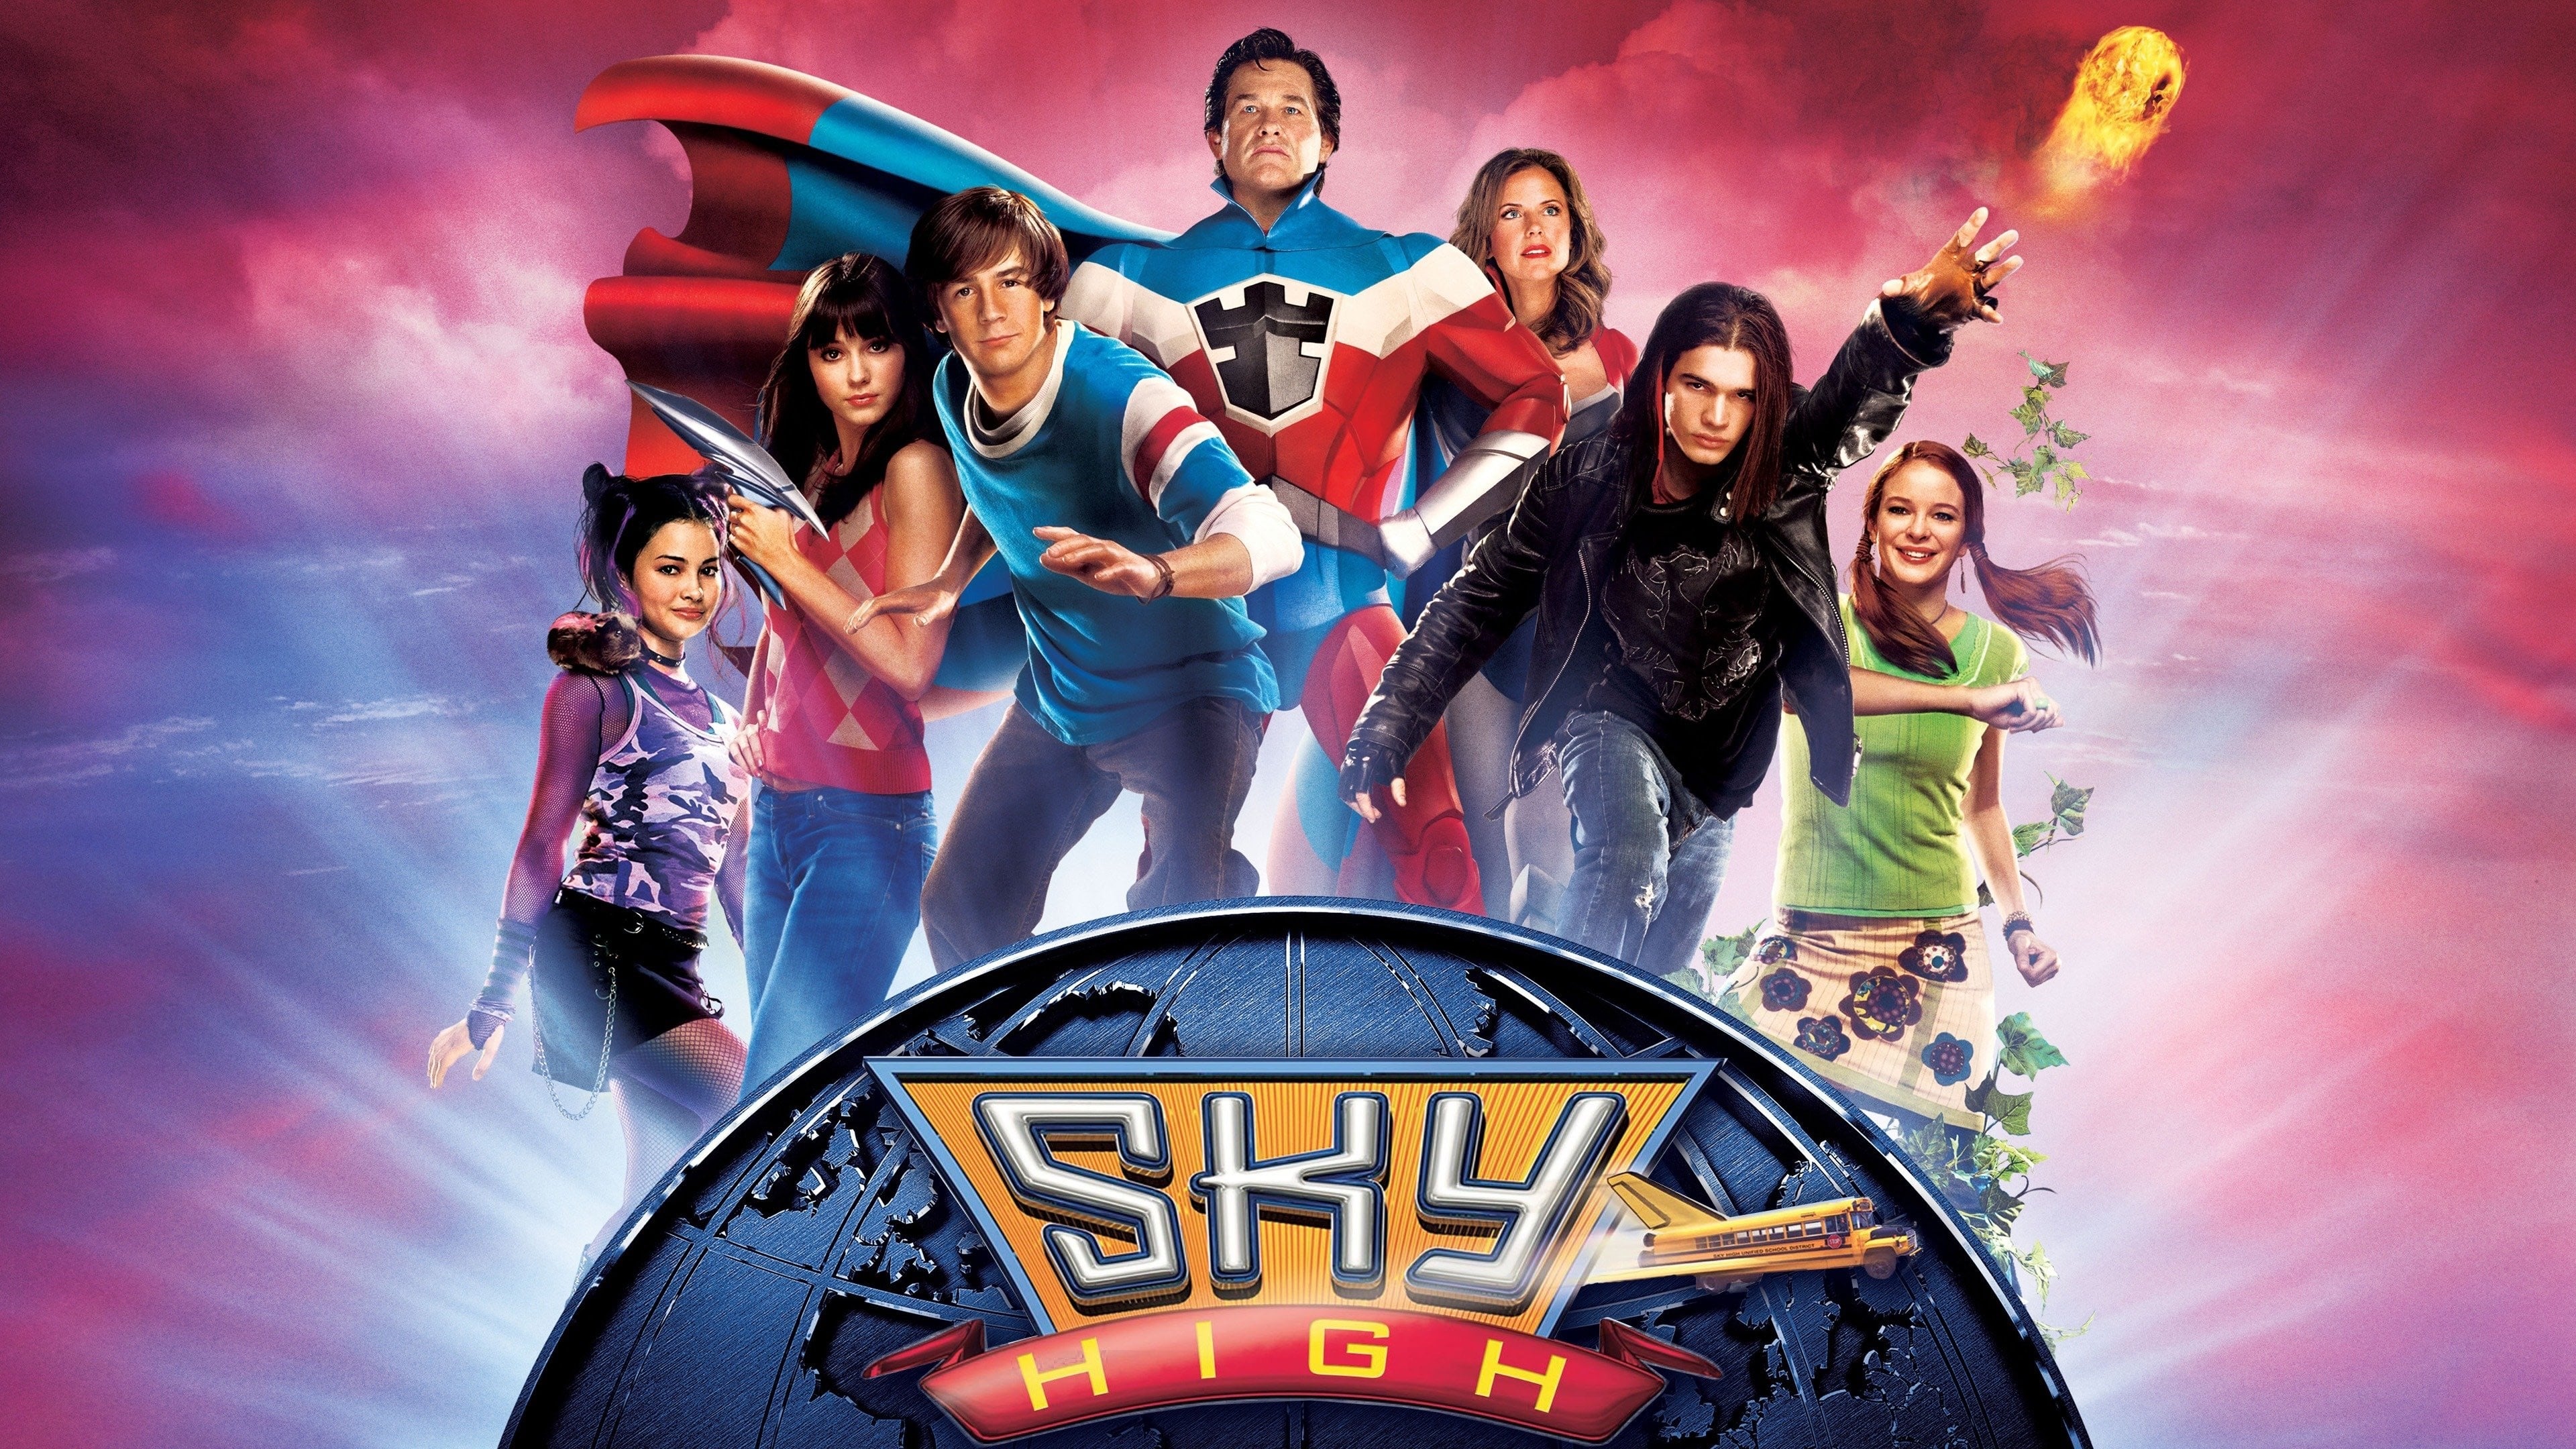 Movie Sky High HD Wallpaper | Background Image